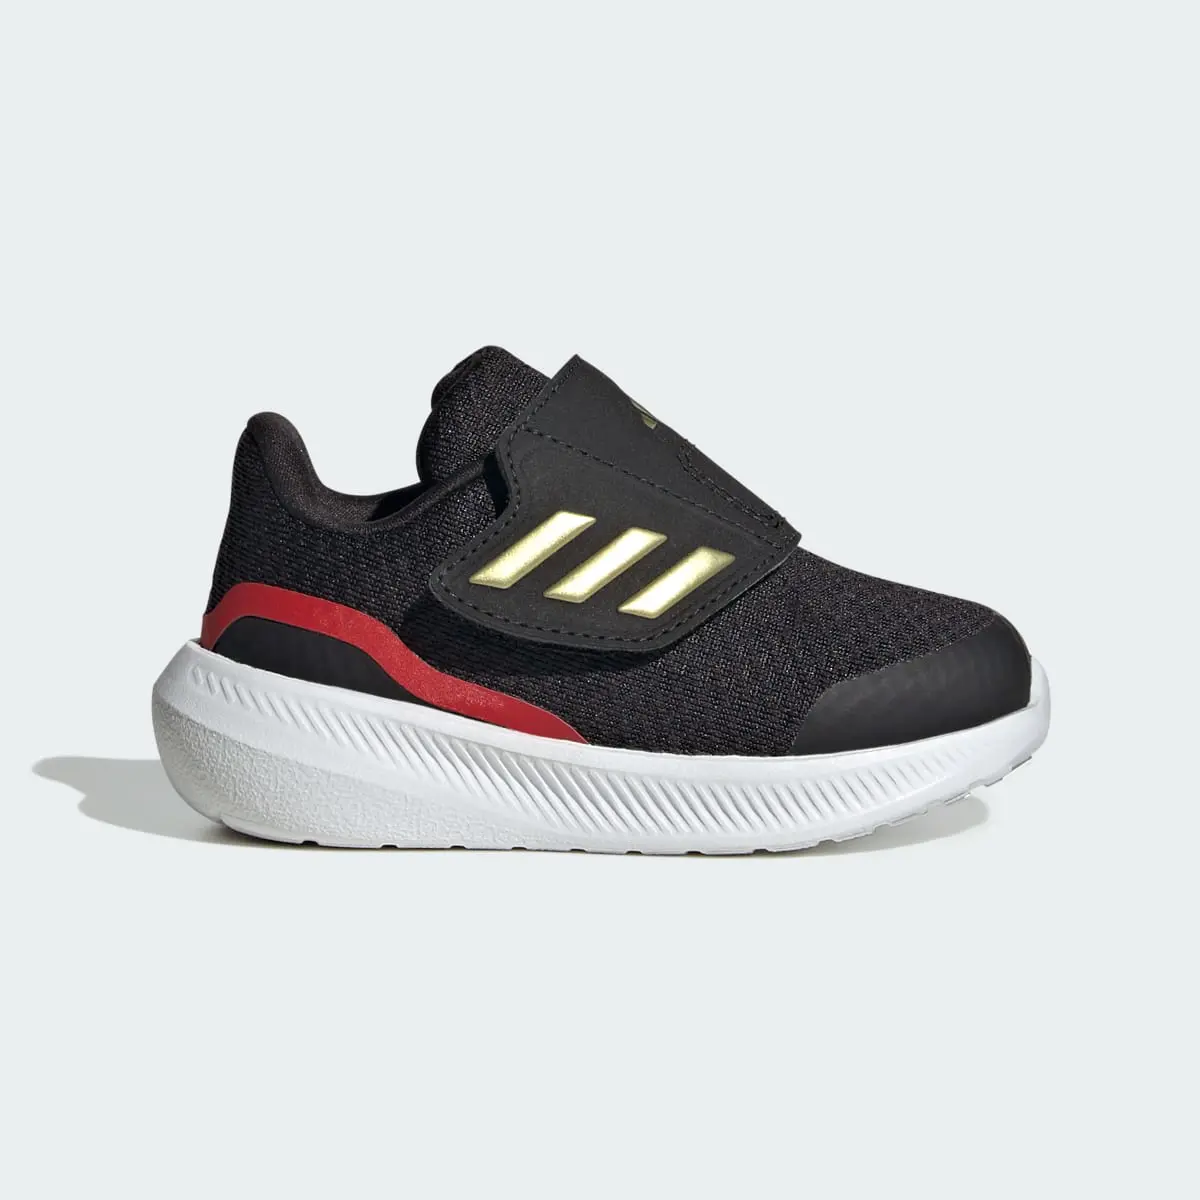 Adidas Runfalcon 3.0 Sport Running Hook-and-Loop Shoes. 2